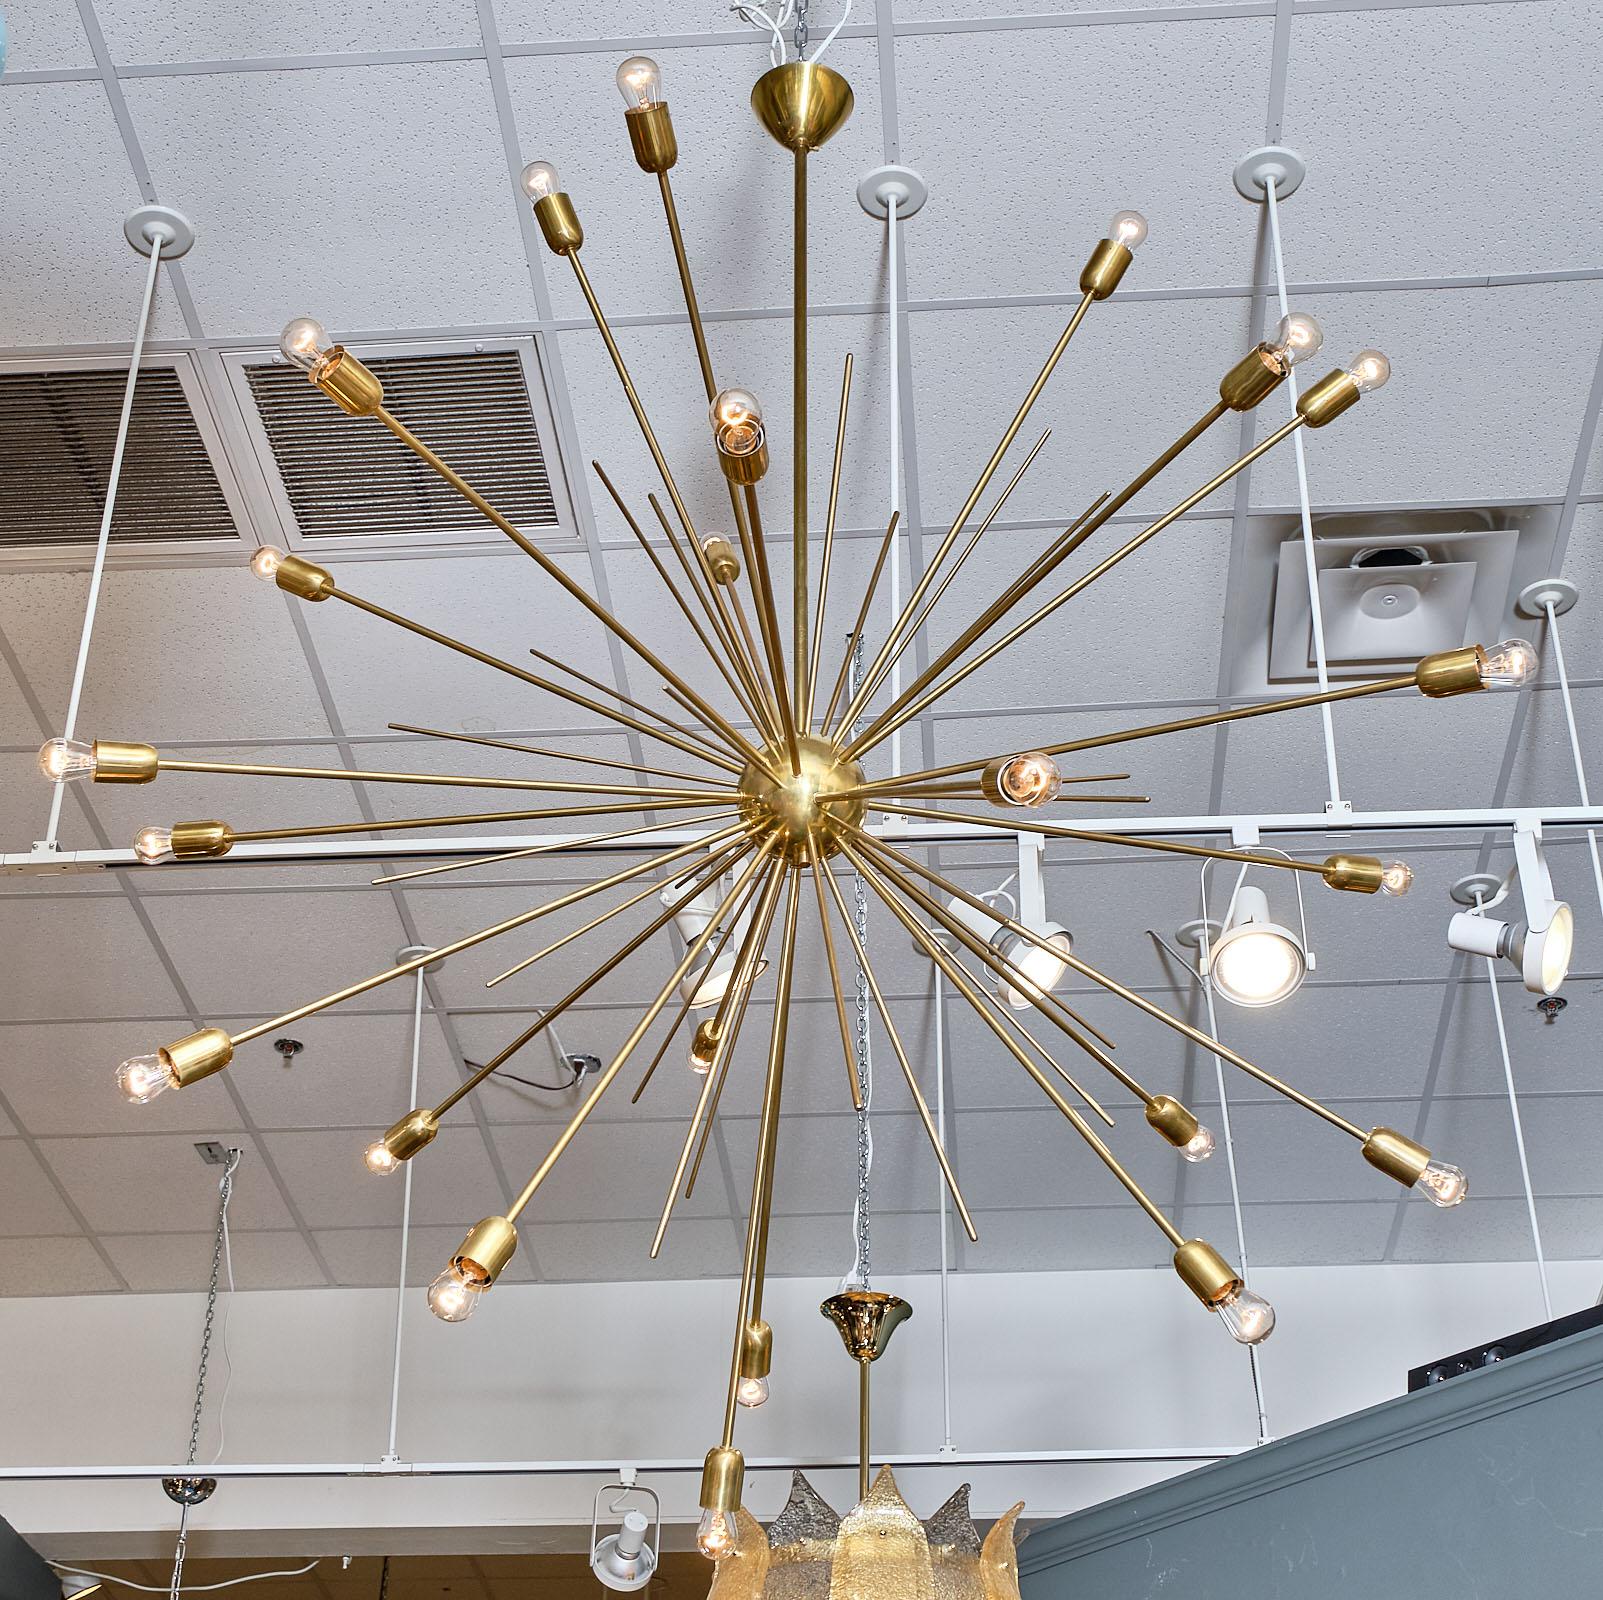 Italian brass Sputnik chandelier with multiple stems; each featuring an oblong gilt brass socket. The central sphere is brass as well and this fixture has been newly wired to fit US standards.